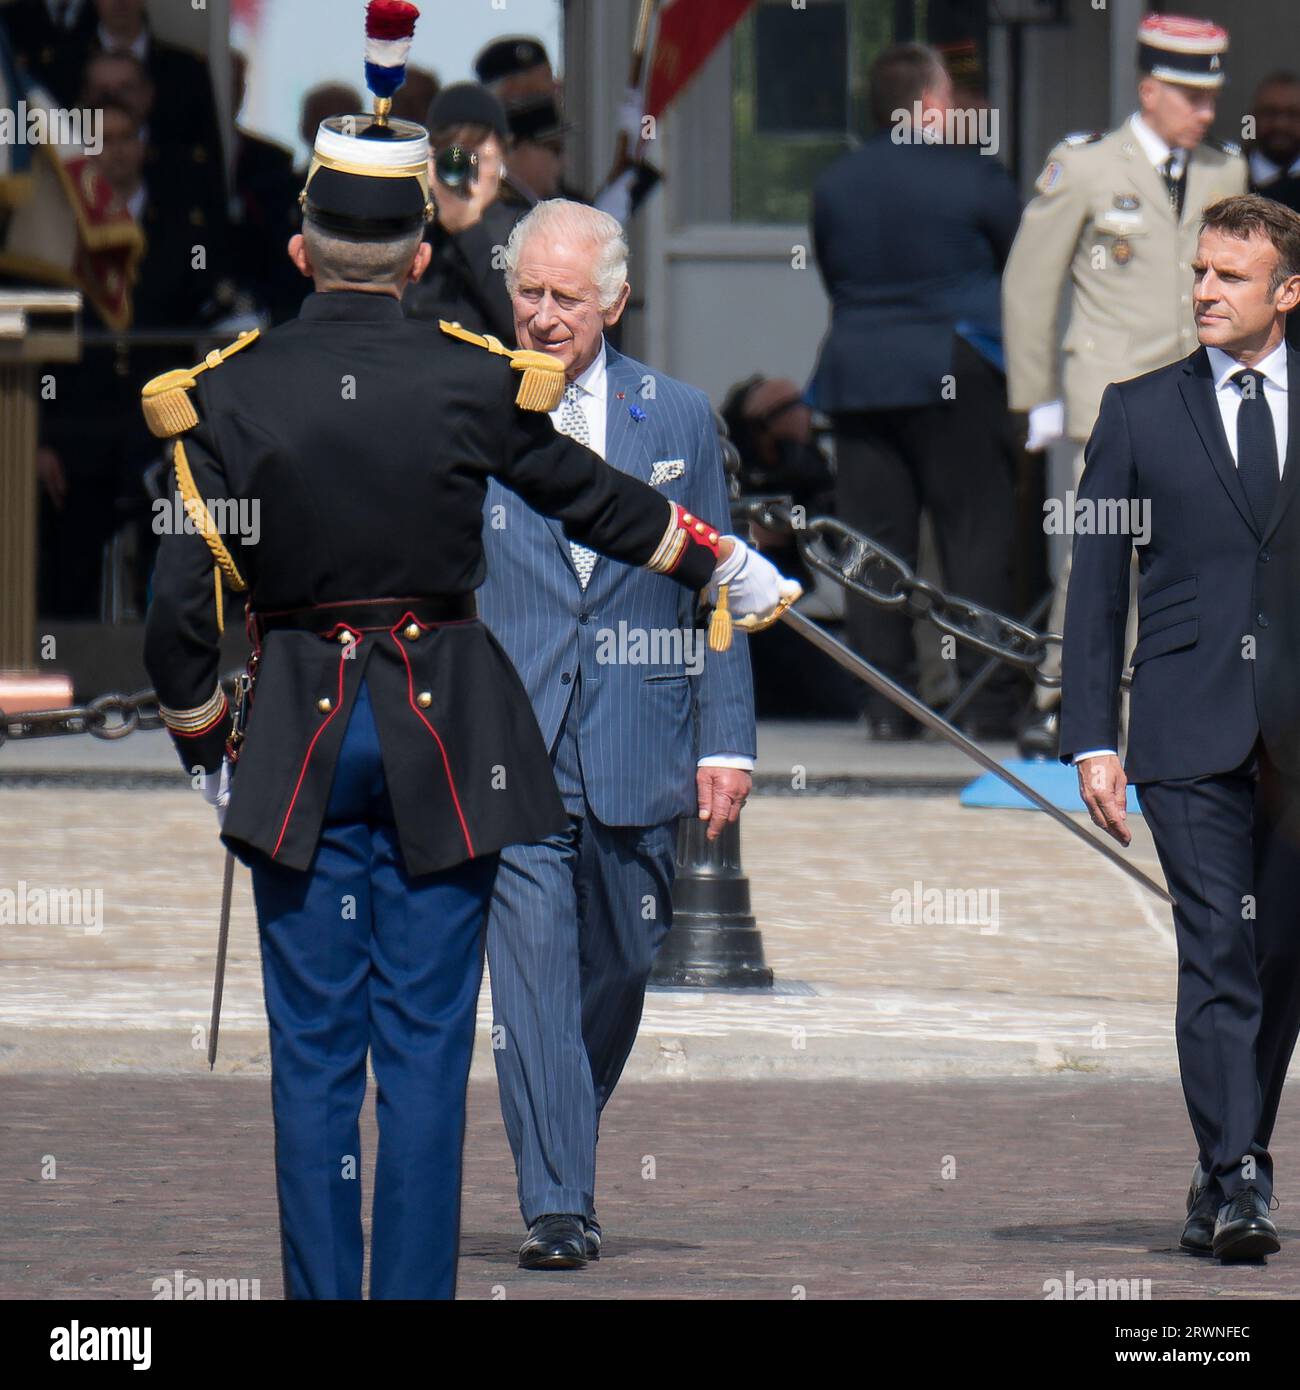 Paris, France, 20th September, 2023. King Charles III walking with Macron at the ceremonial welcome at the Arc de Triomphe  - Jacques Julien/Alamy Live News Stock Photo